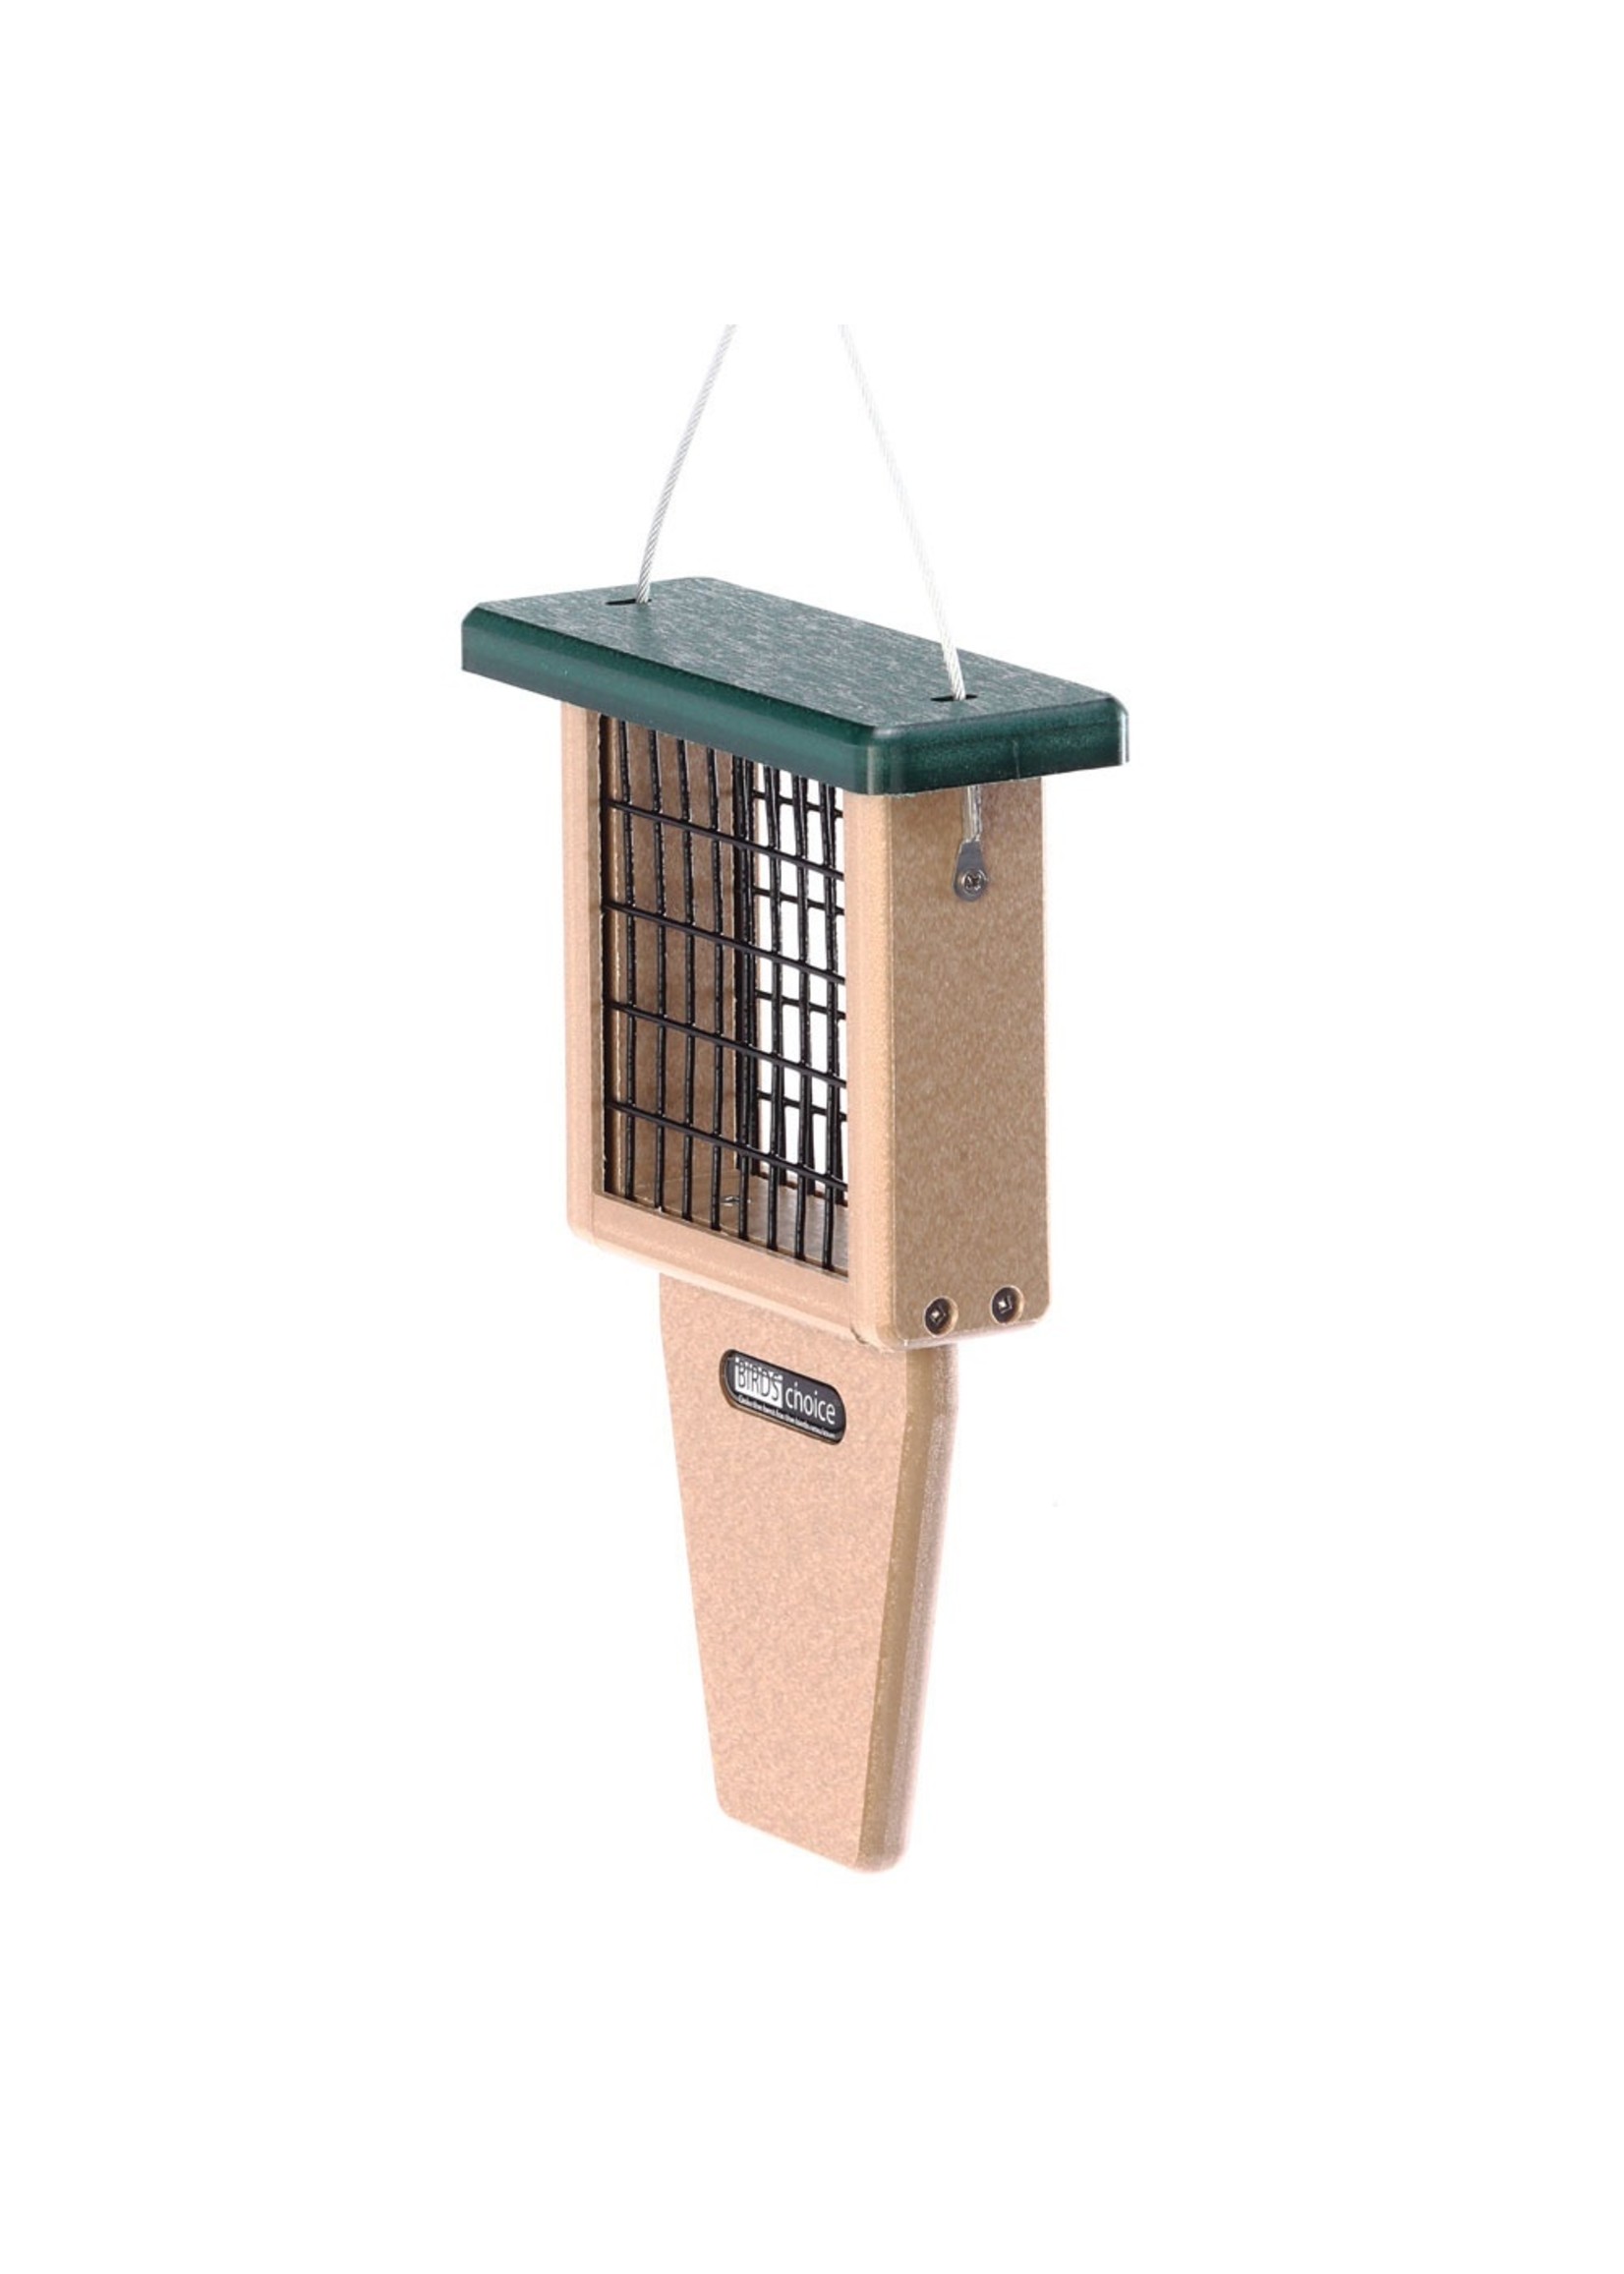 Birds Choice Single Tail Prop Suet Feeder - Recycled